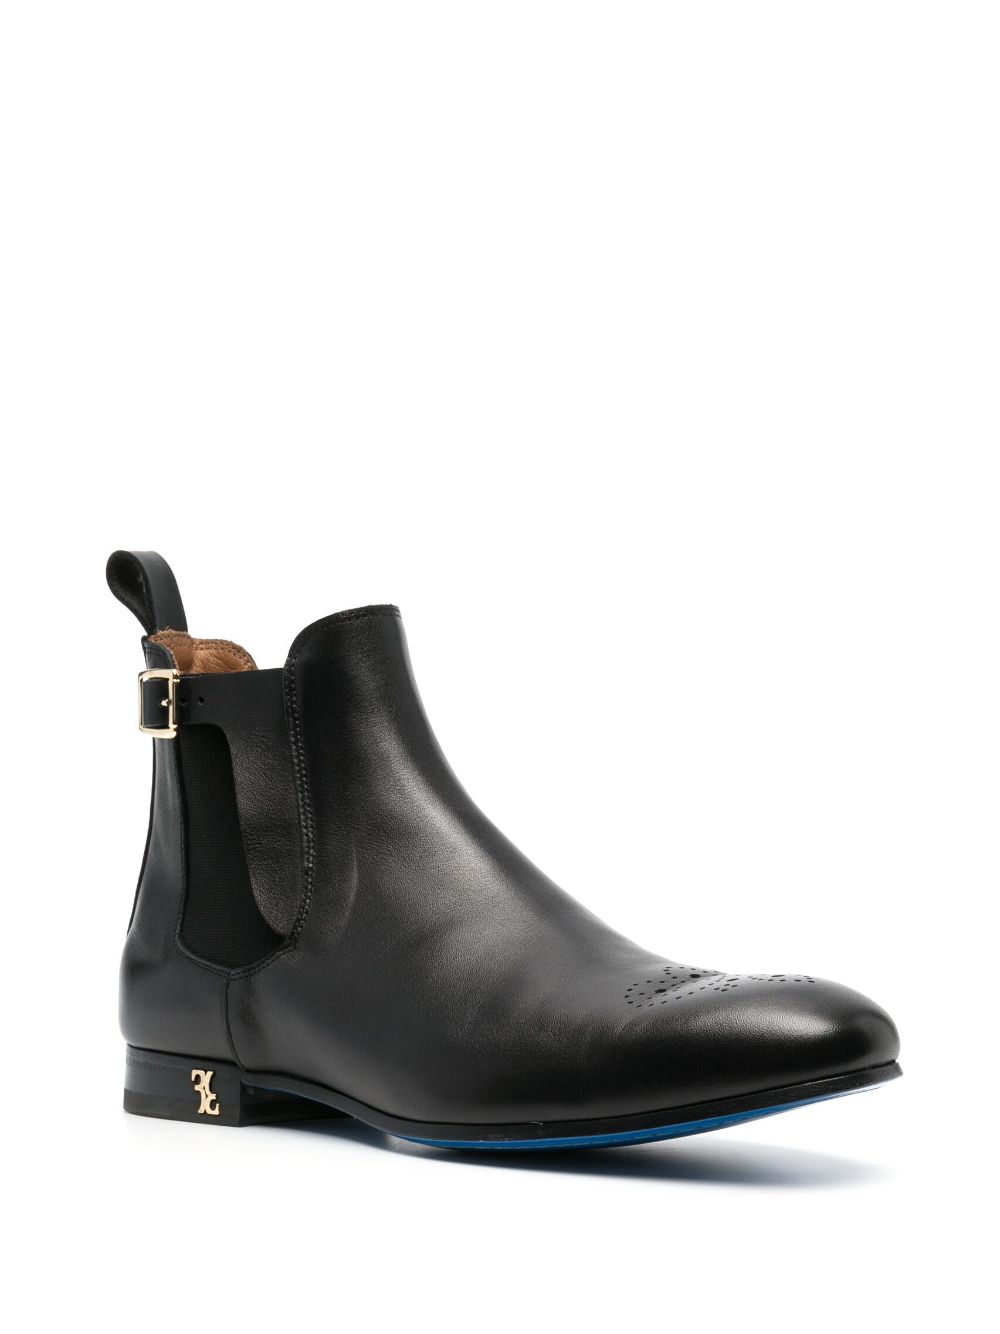 Image 2 of Billionaire flat leather boots